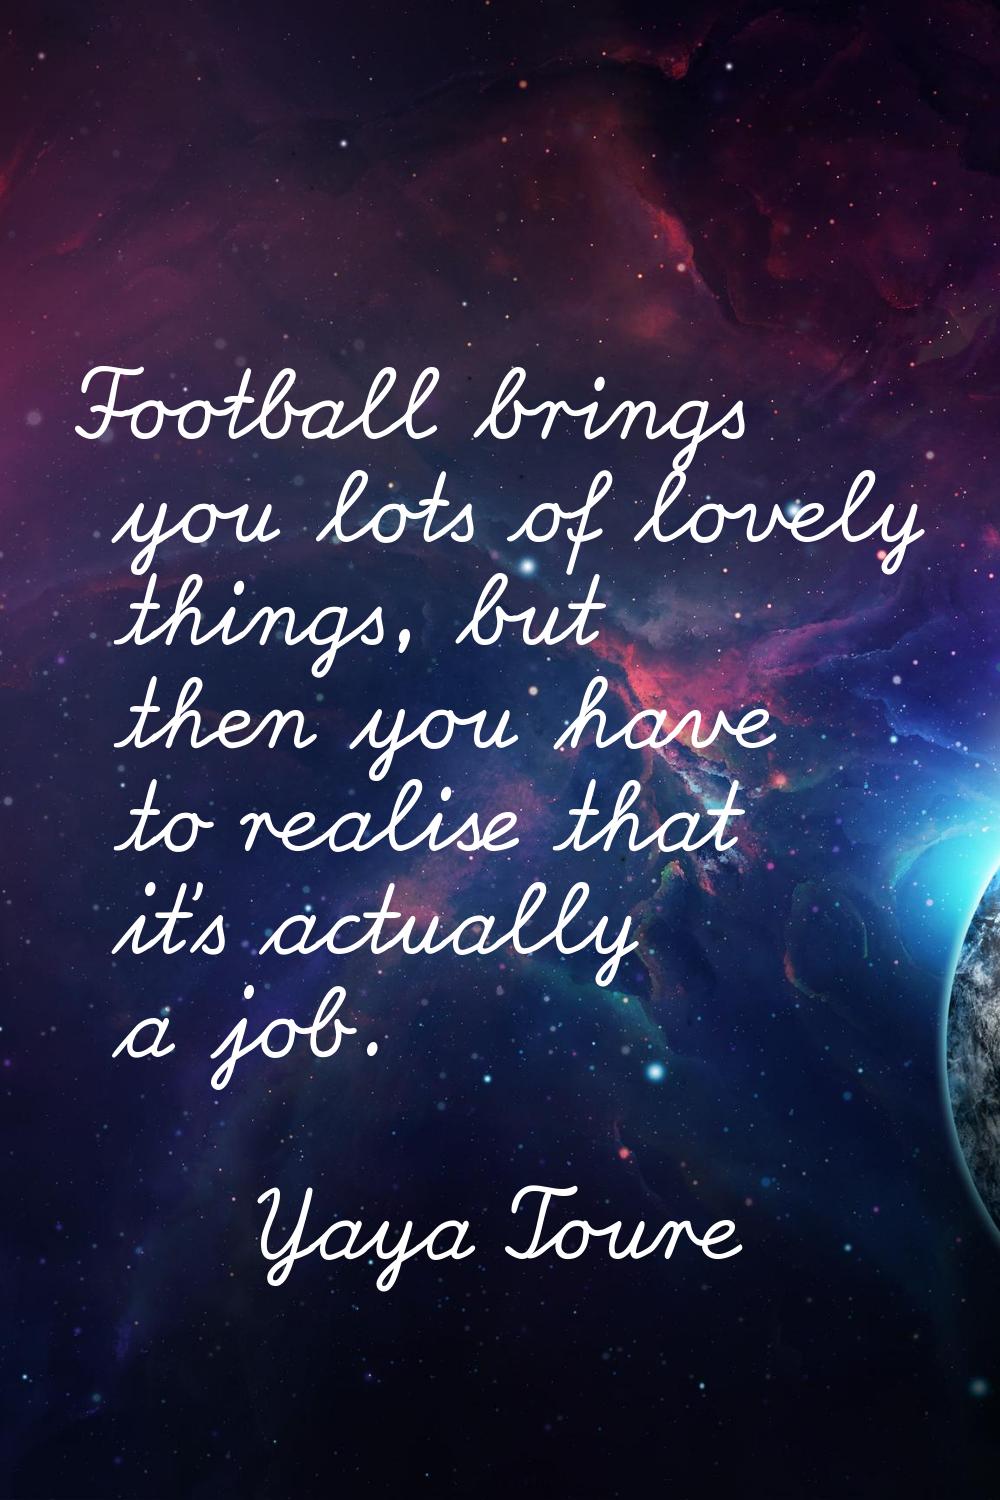 Football brings you lots of lovely things, but then you have to realise that it's actually a job.